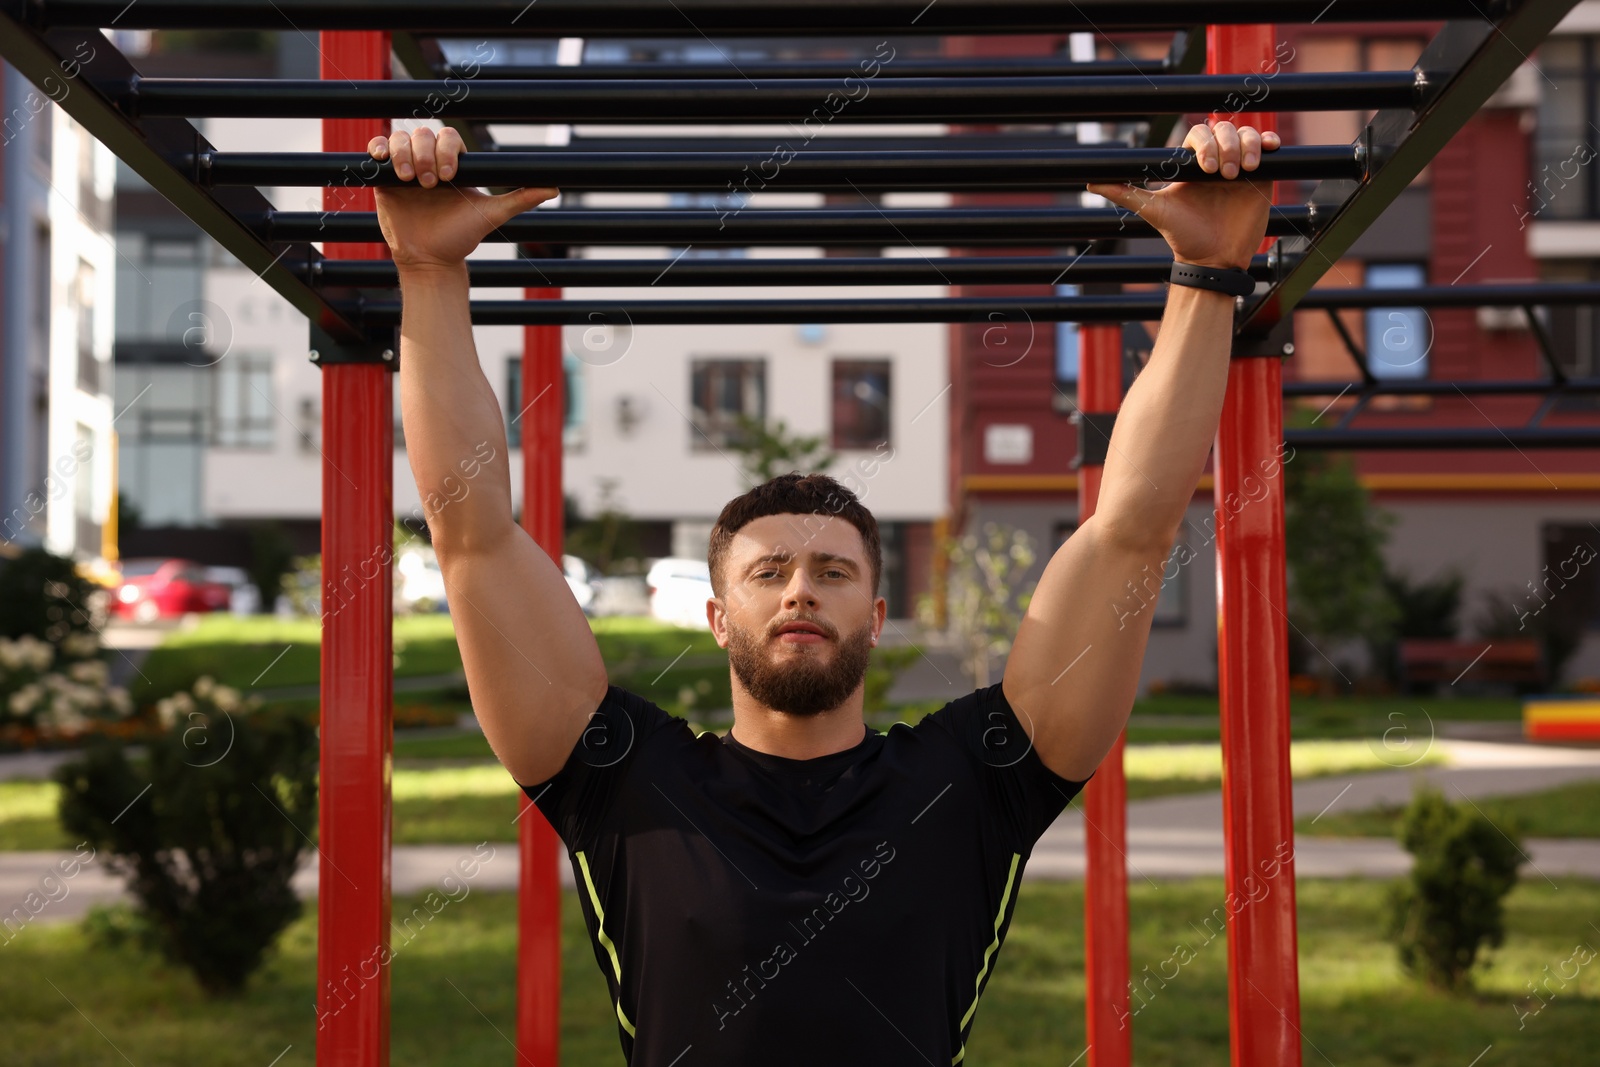 Photo of Man training on monkey bars at outdoor gym